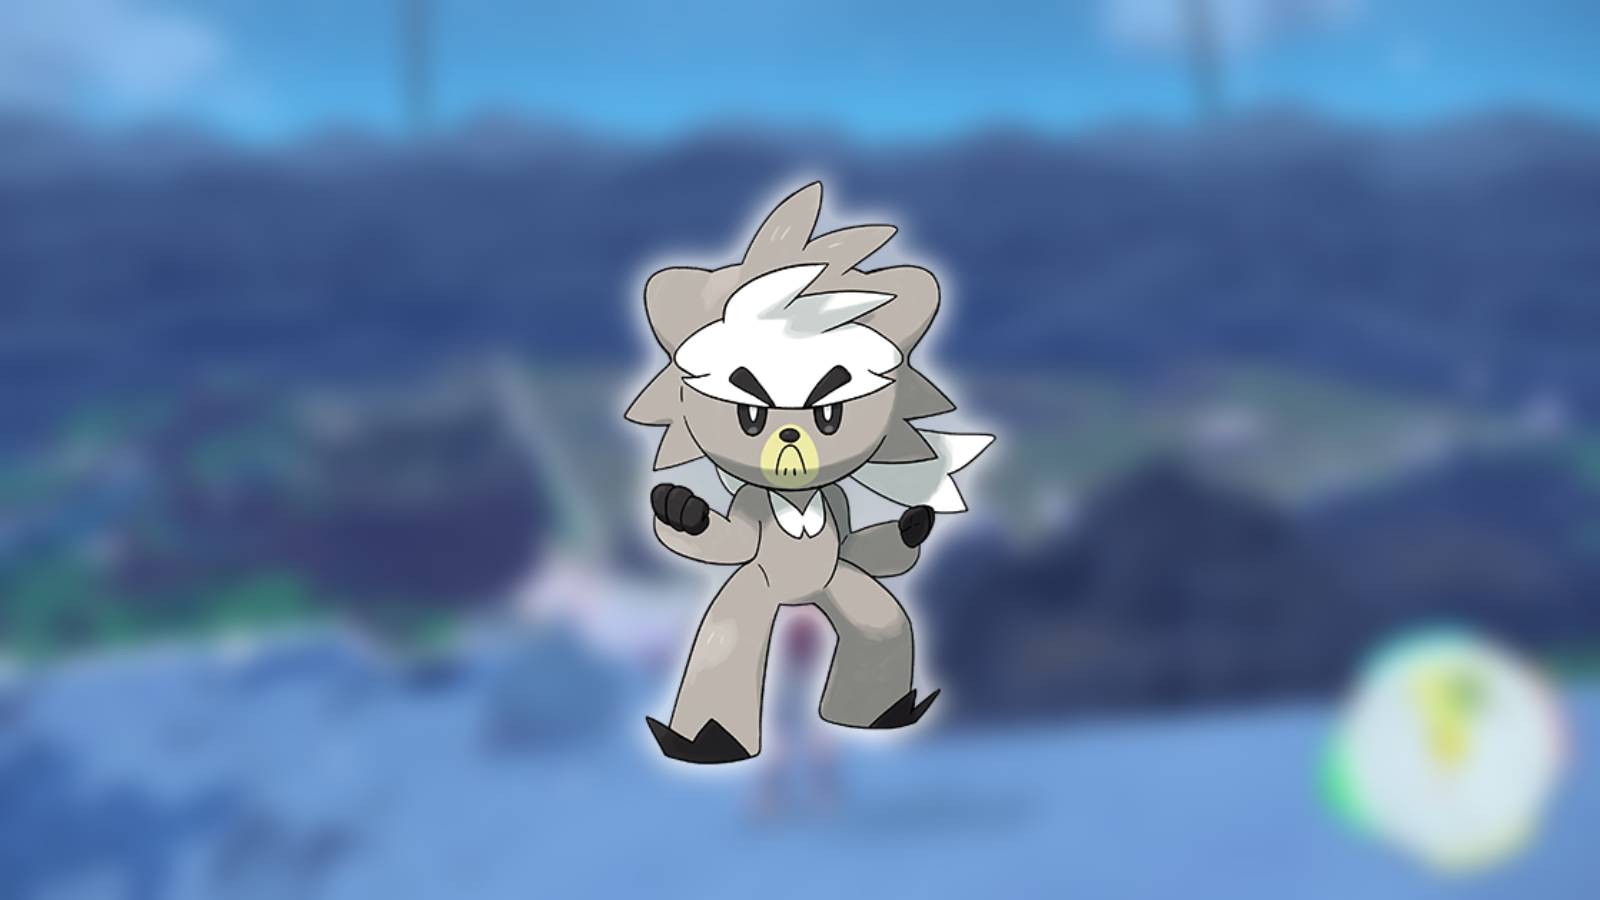 The Pokemon Kubfu appears against a blurred background